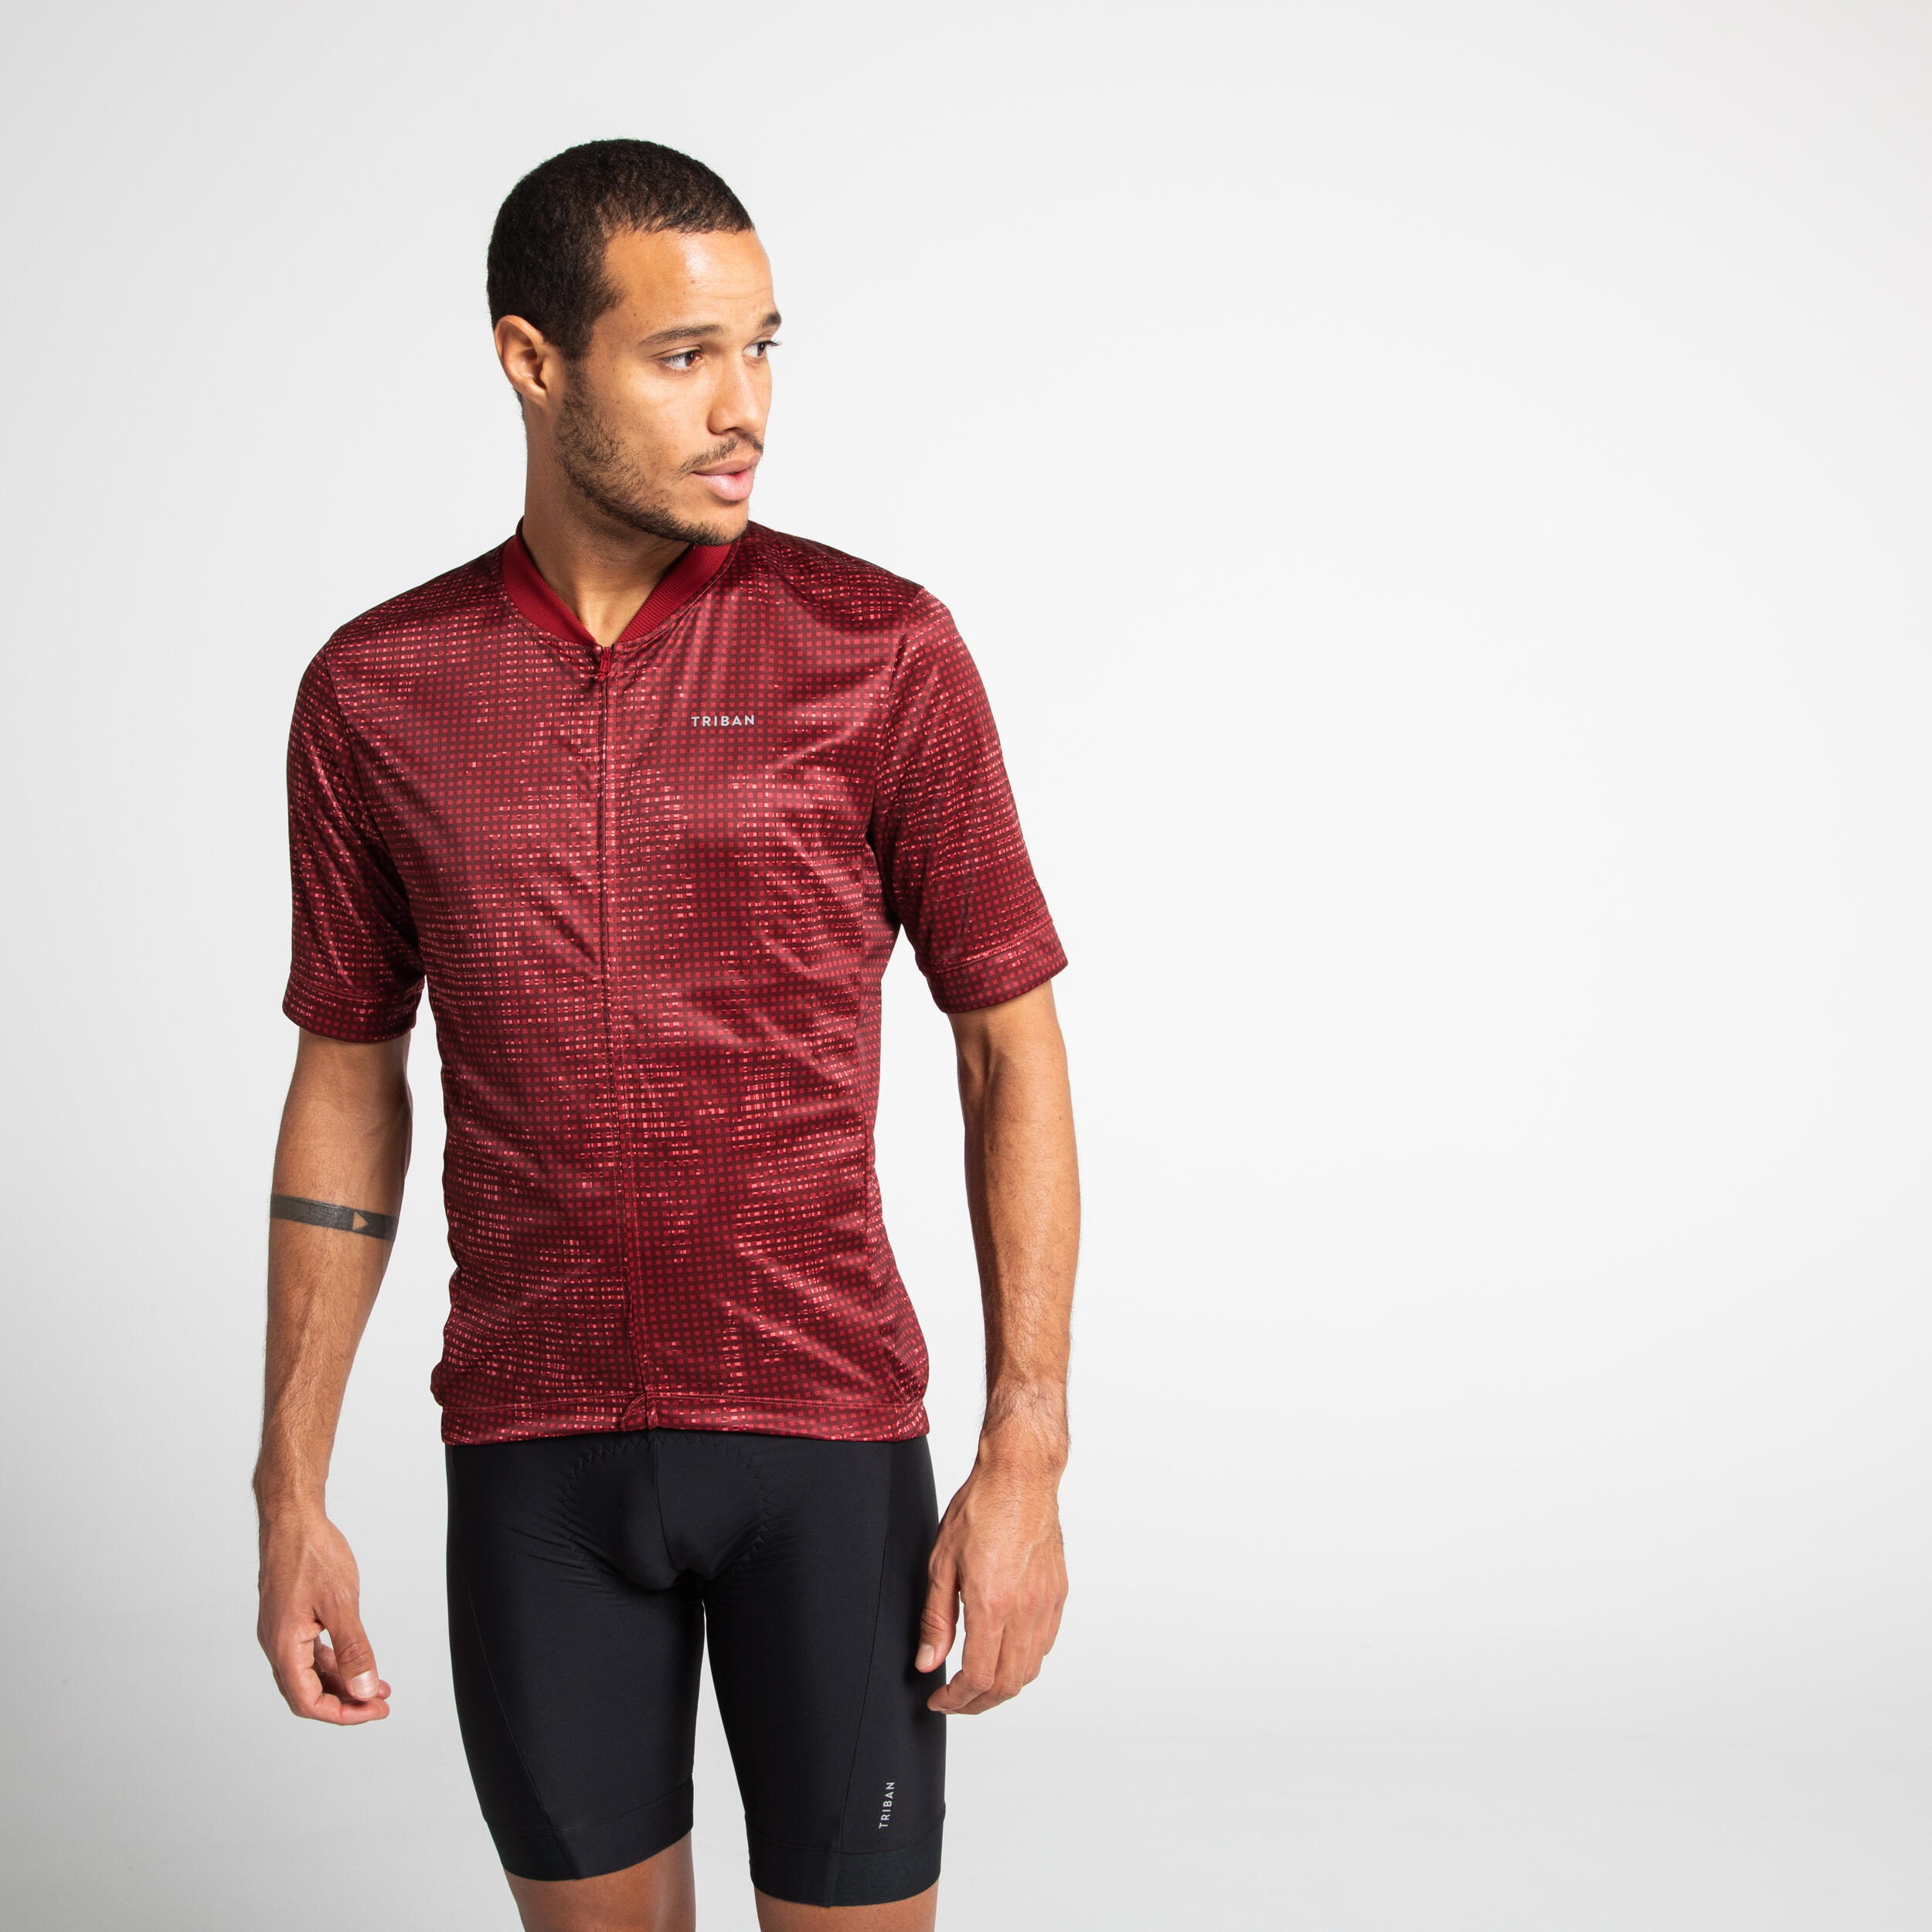 Men's Short-Sleeved Road Cycling Summer Jersey RC100 - Burgundy 6/7